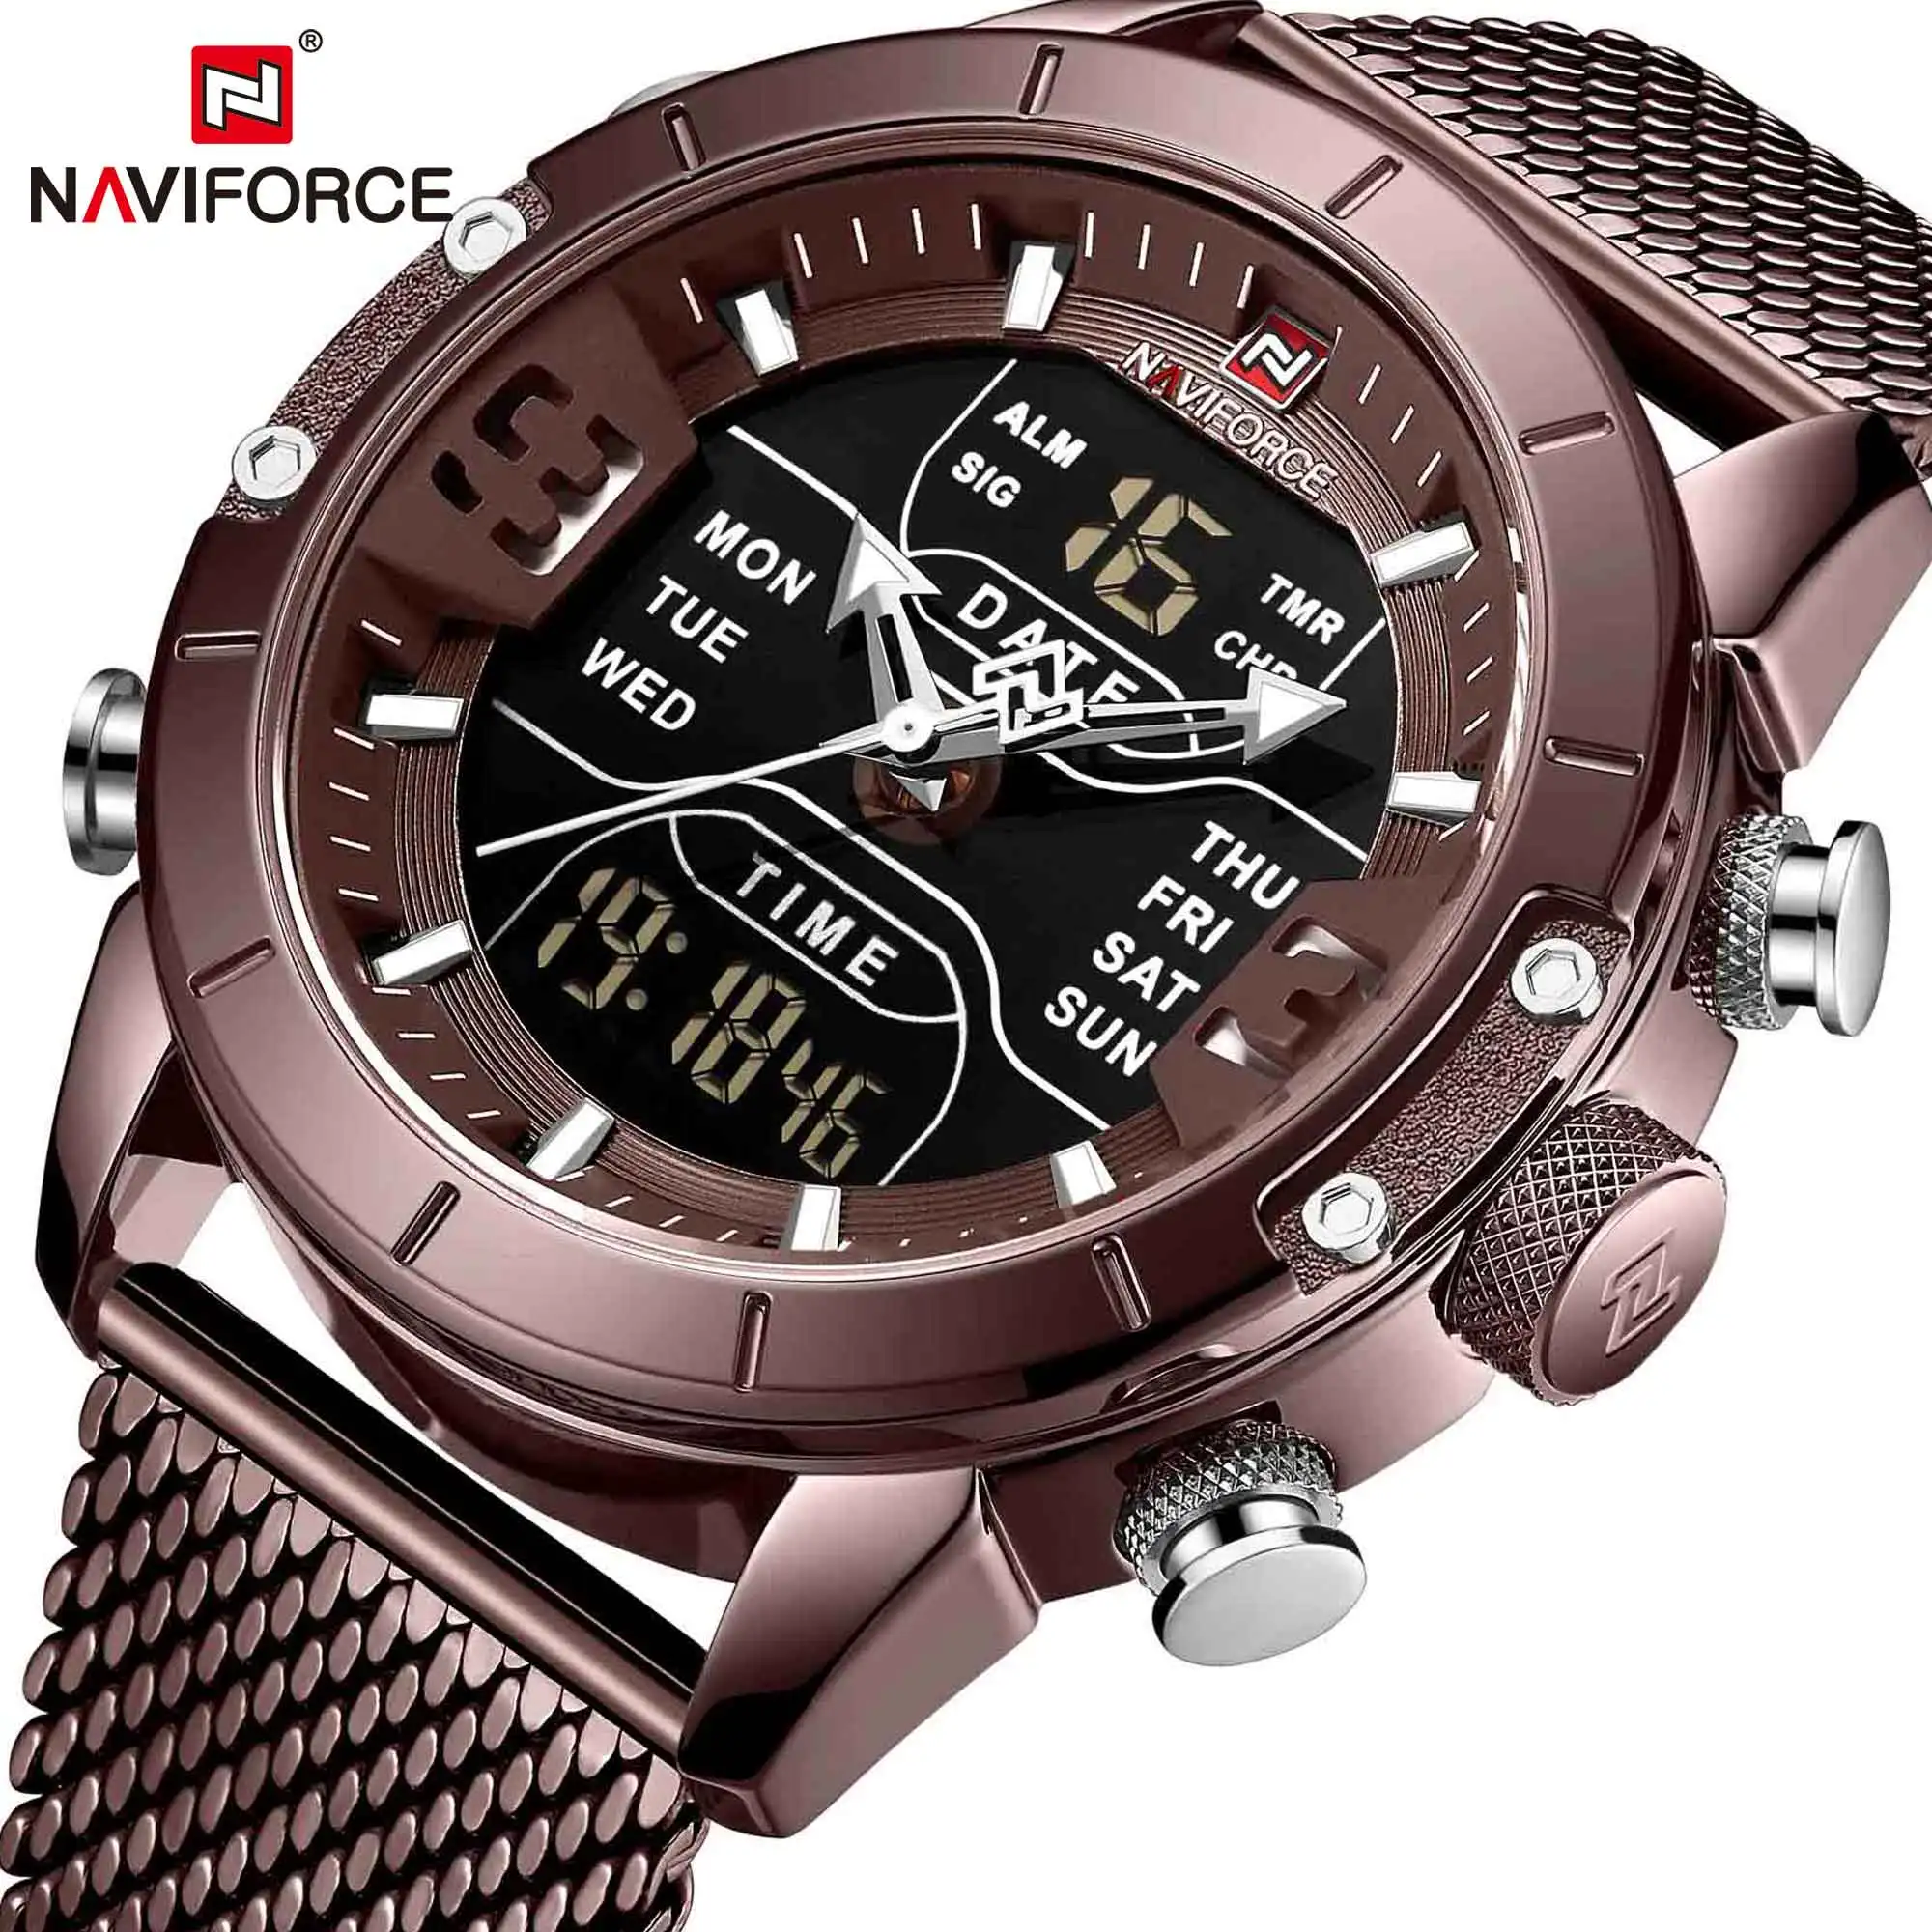 

NAVIFORCE Top Brand Wrist Watches Male Casual Sport Led Digital Dual Time Alarm Waterproof Steel Strap Watches Relogio Masculino